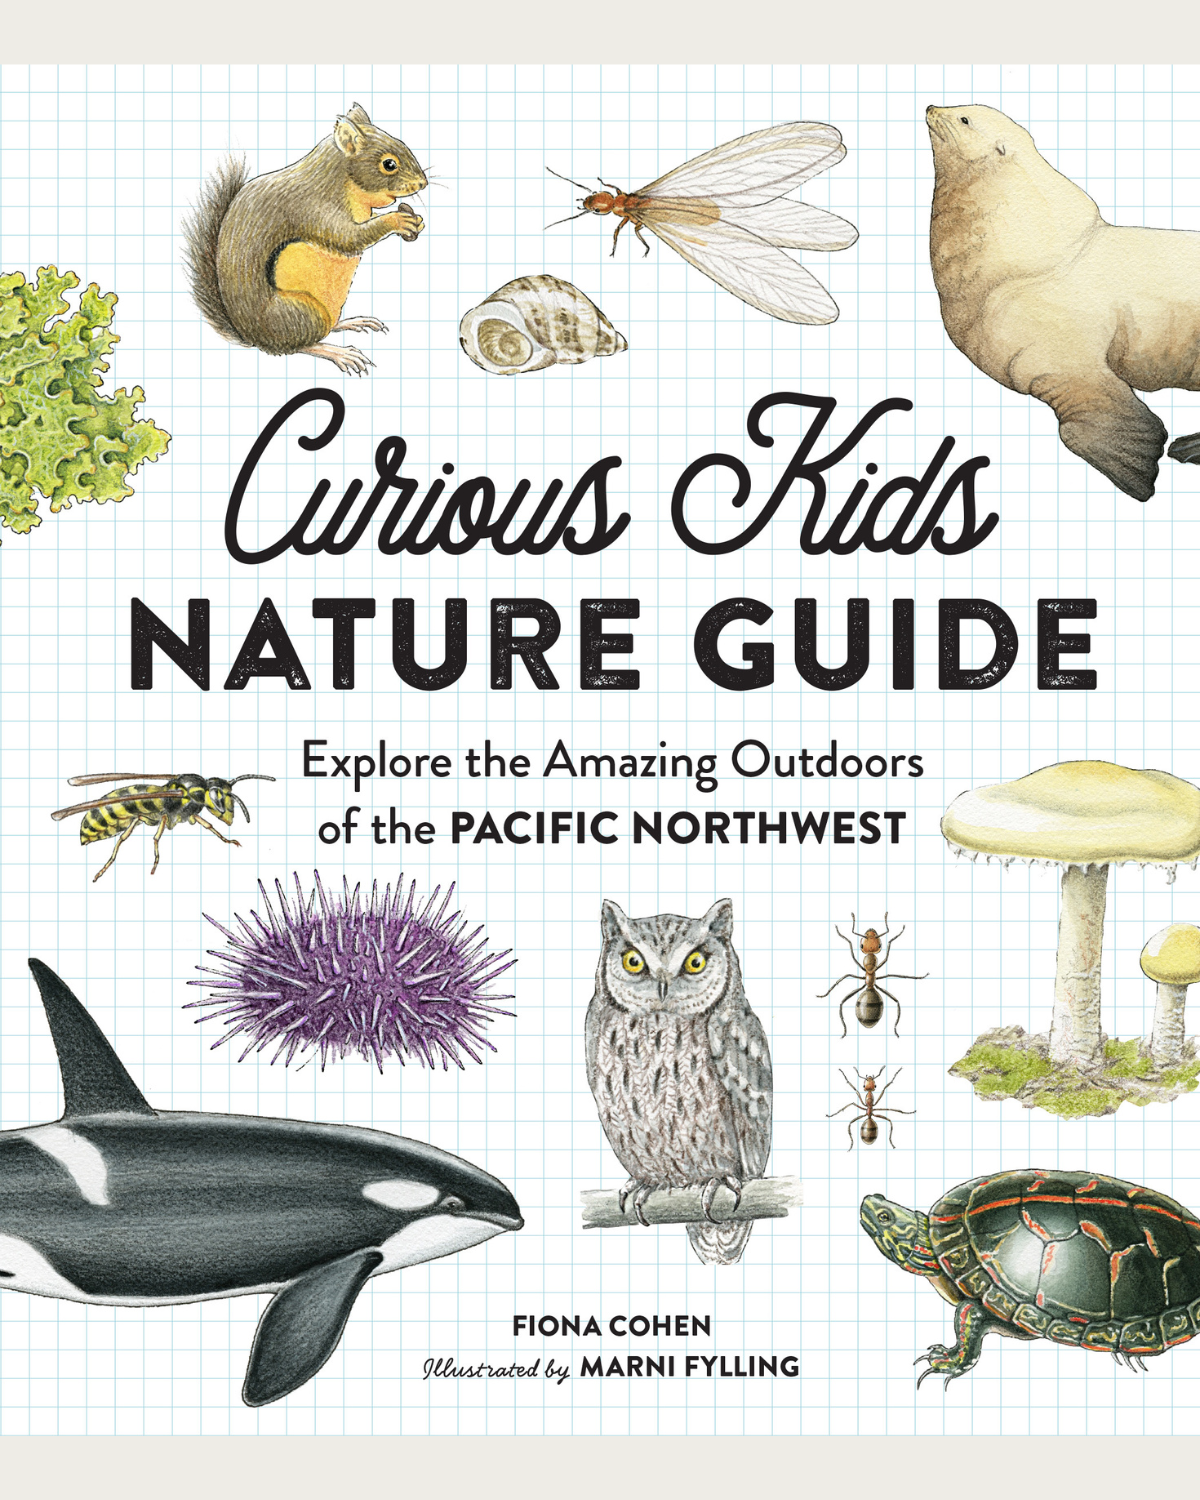 Curious Kids Nature Guide by Fiona Cohen